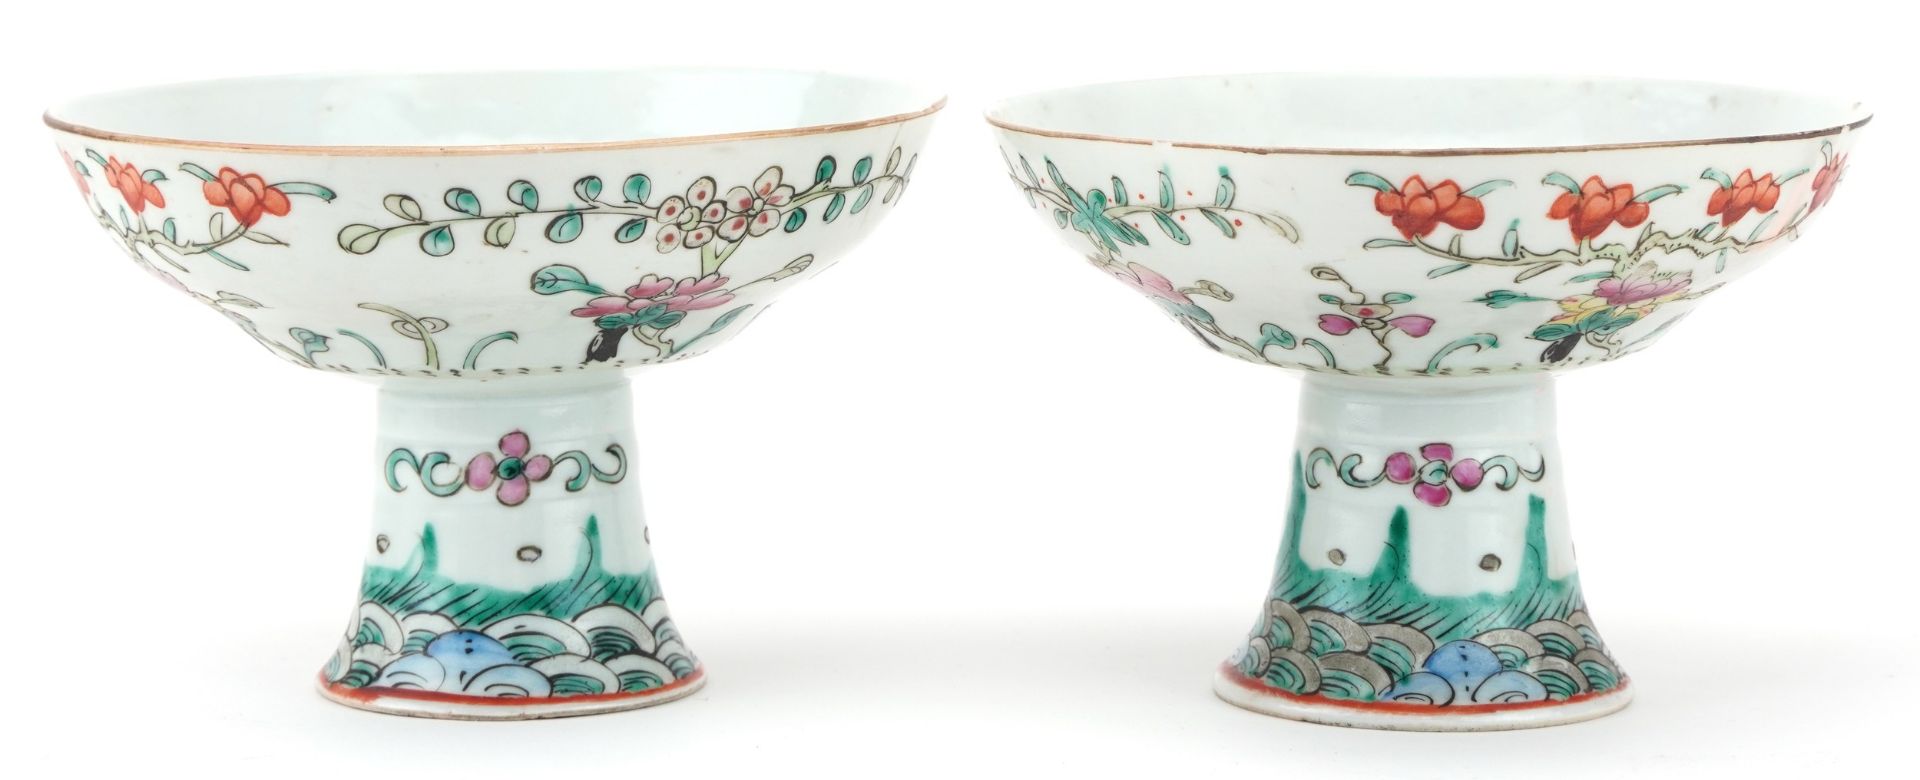 Pair of Chinese porcelain stem bowls hand painted in the famille rose palette with flowers, each